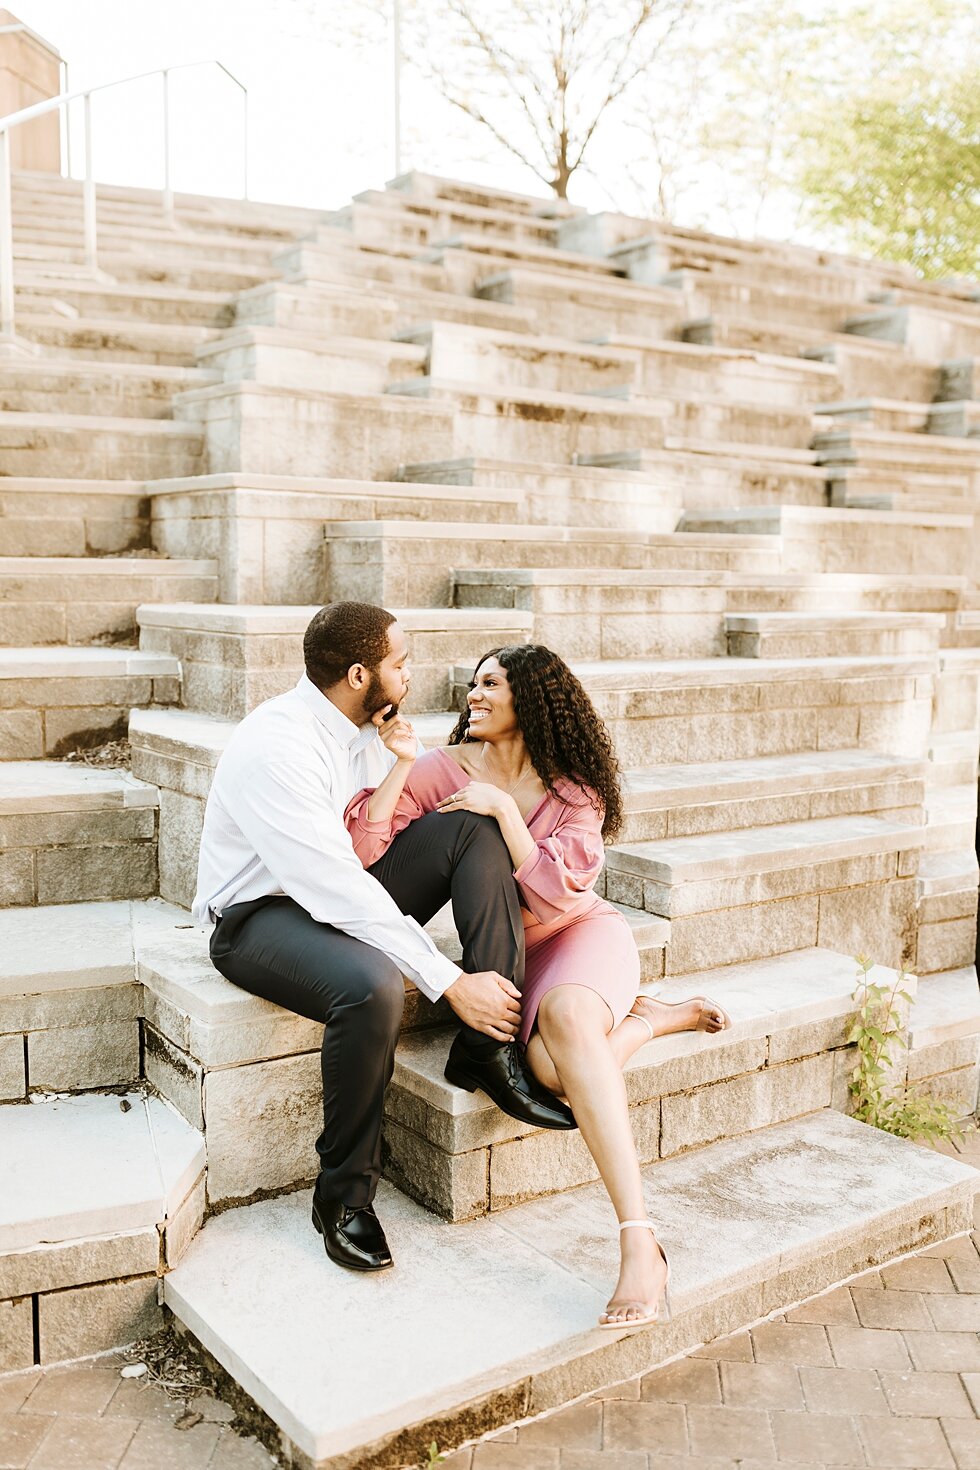  Textured staircase behind this African American couple urban engagement pictures in downtown Louisville Muhammad Ali center and belvedere #engaged #muhumadalicenter #belvedere #shesaidyes #engaged #padbl #photographyanddesignbylauren #urban #city #u